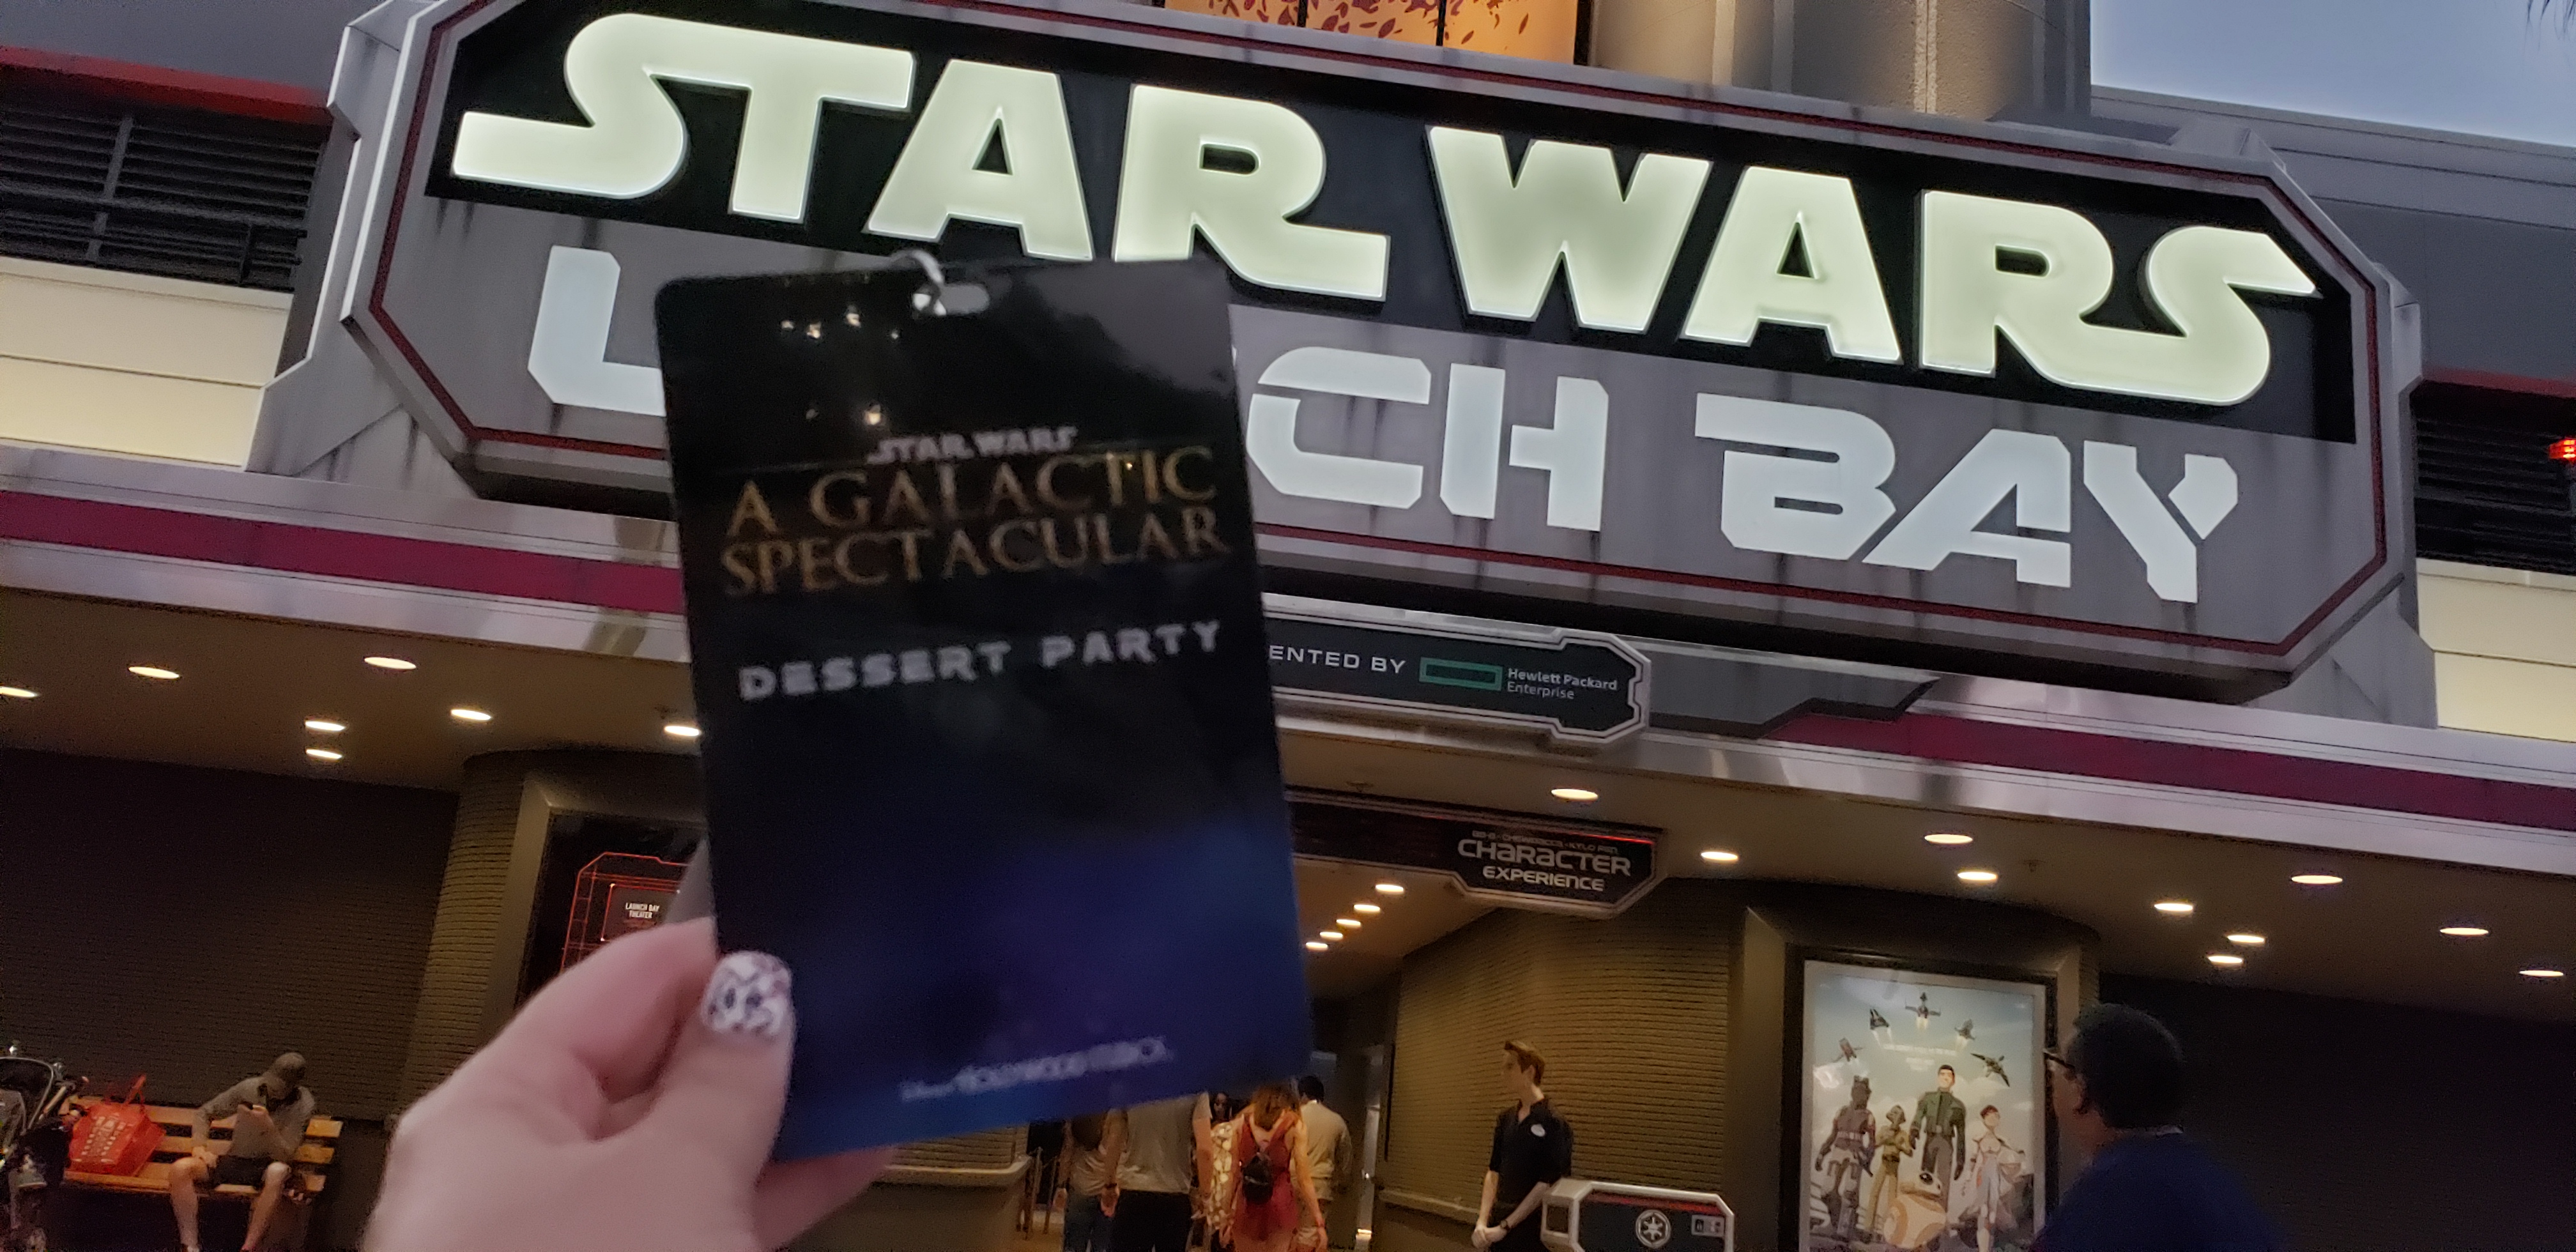 Star Wars Galactic Spectacular Dessert Party Review